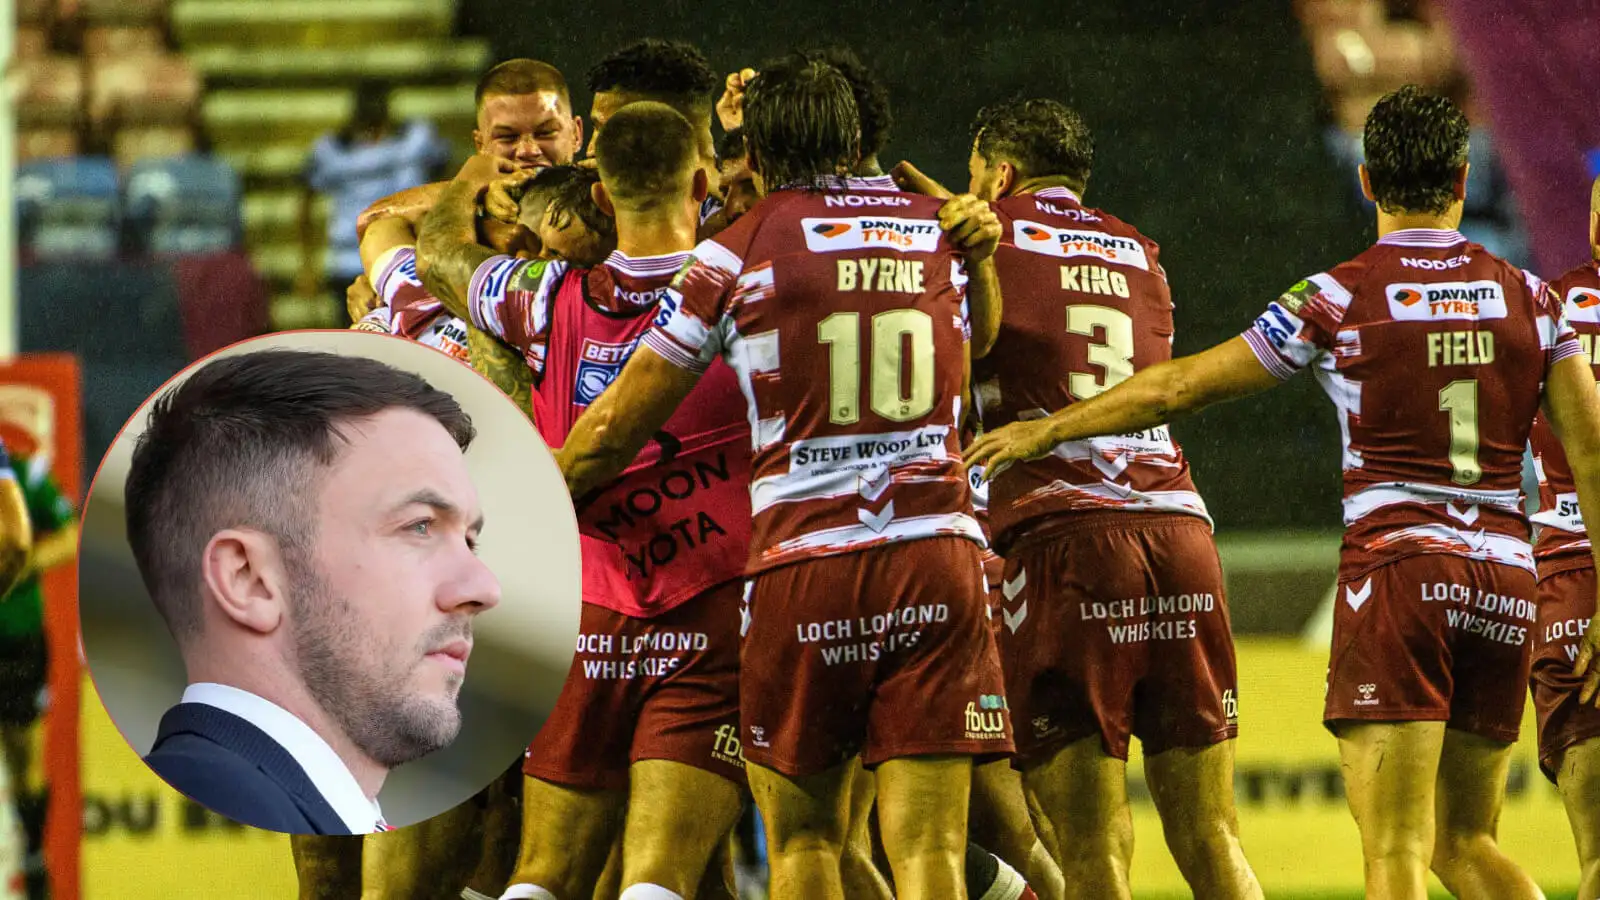 Super League star delivers verdict on Wigan Warriors’ Grand Final ambitions: ‘They’re a champion side’